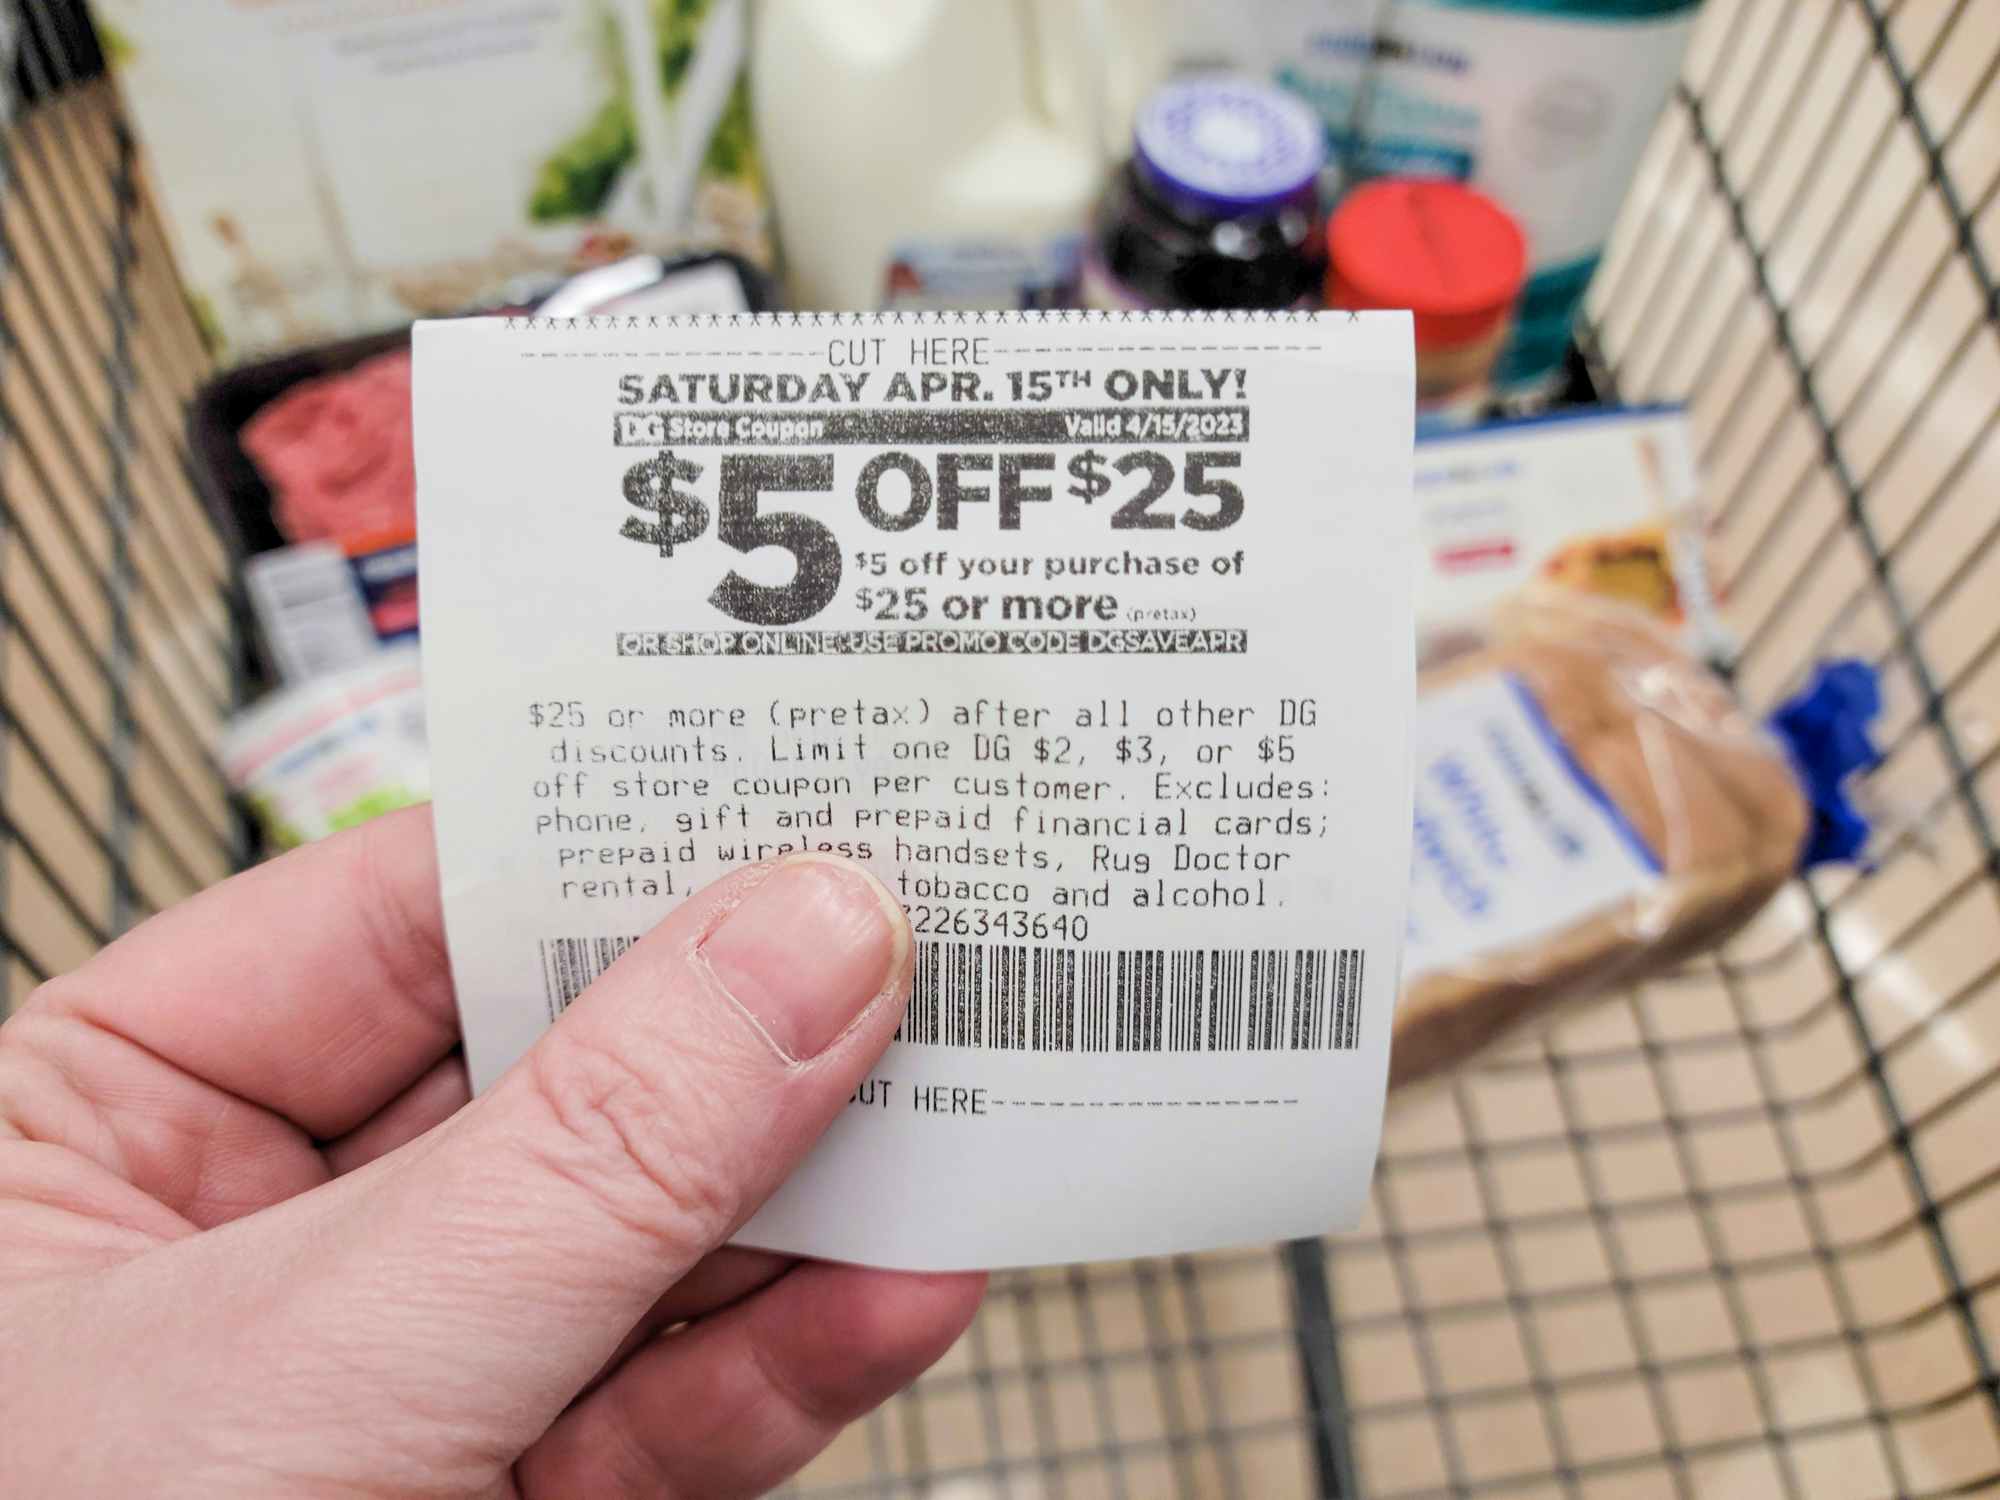 Someone holding a coupon in front of Food Lion groceries in a shopping cart